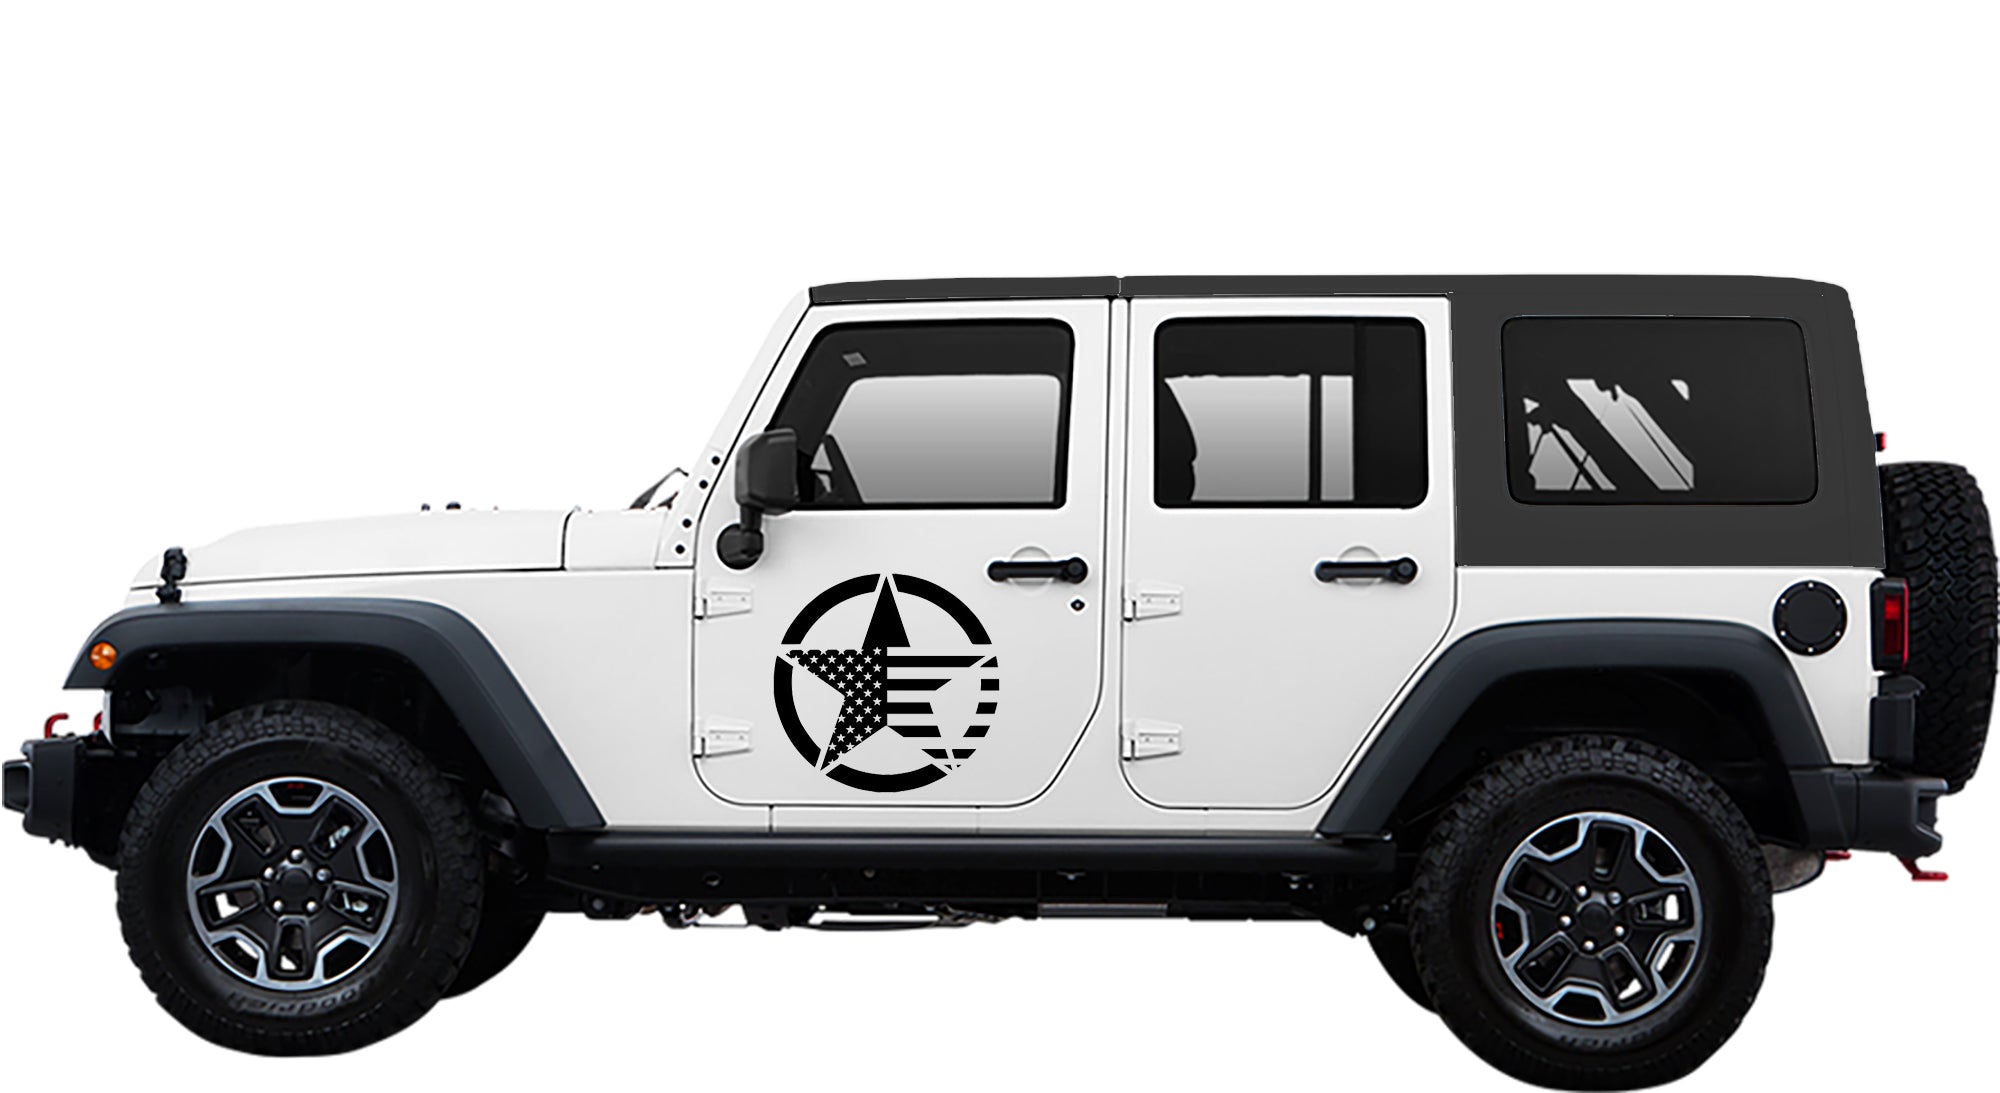 army star decals for jeep wrangler 2007 to 2018 models